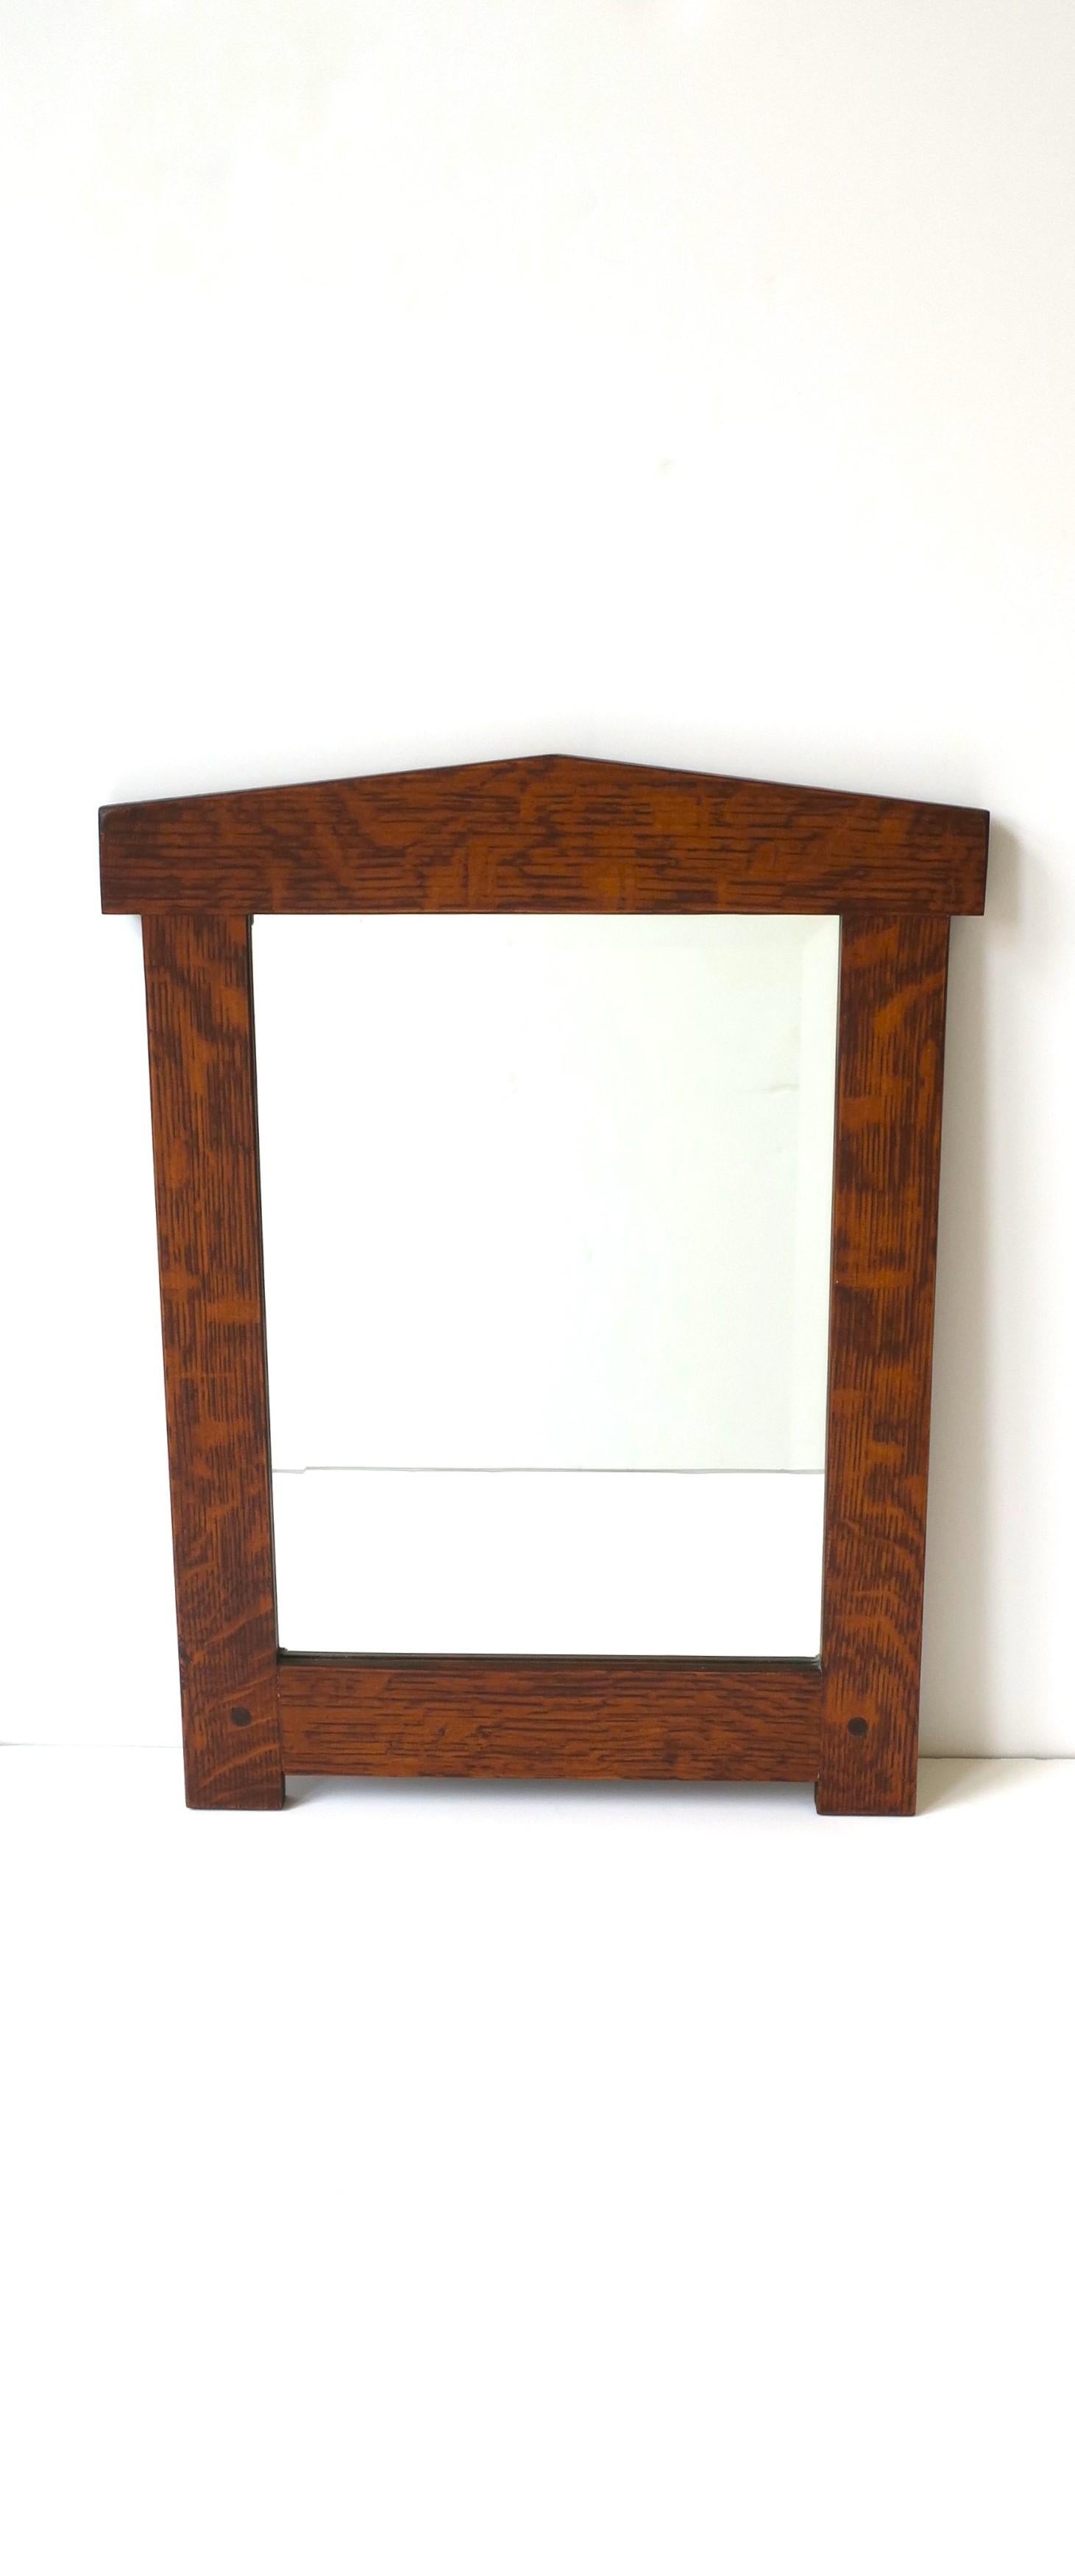 A wood framed wall mirror with beveled mirrored glass, Empire Revival style, circa 20th century, Europe. This mirror is rectangular with a beautiful wood frame and beveled mirrored glass. A great wall mirror for a hall, foyer, closet, vanity area,